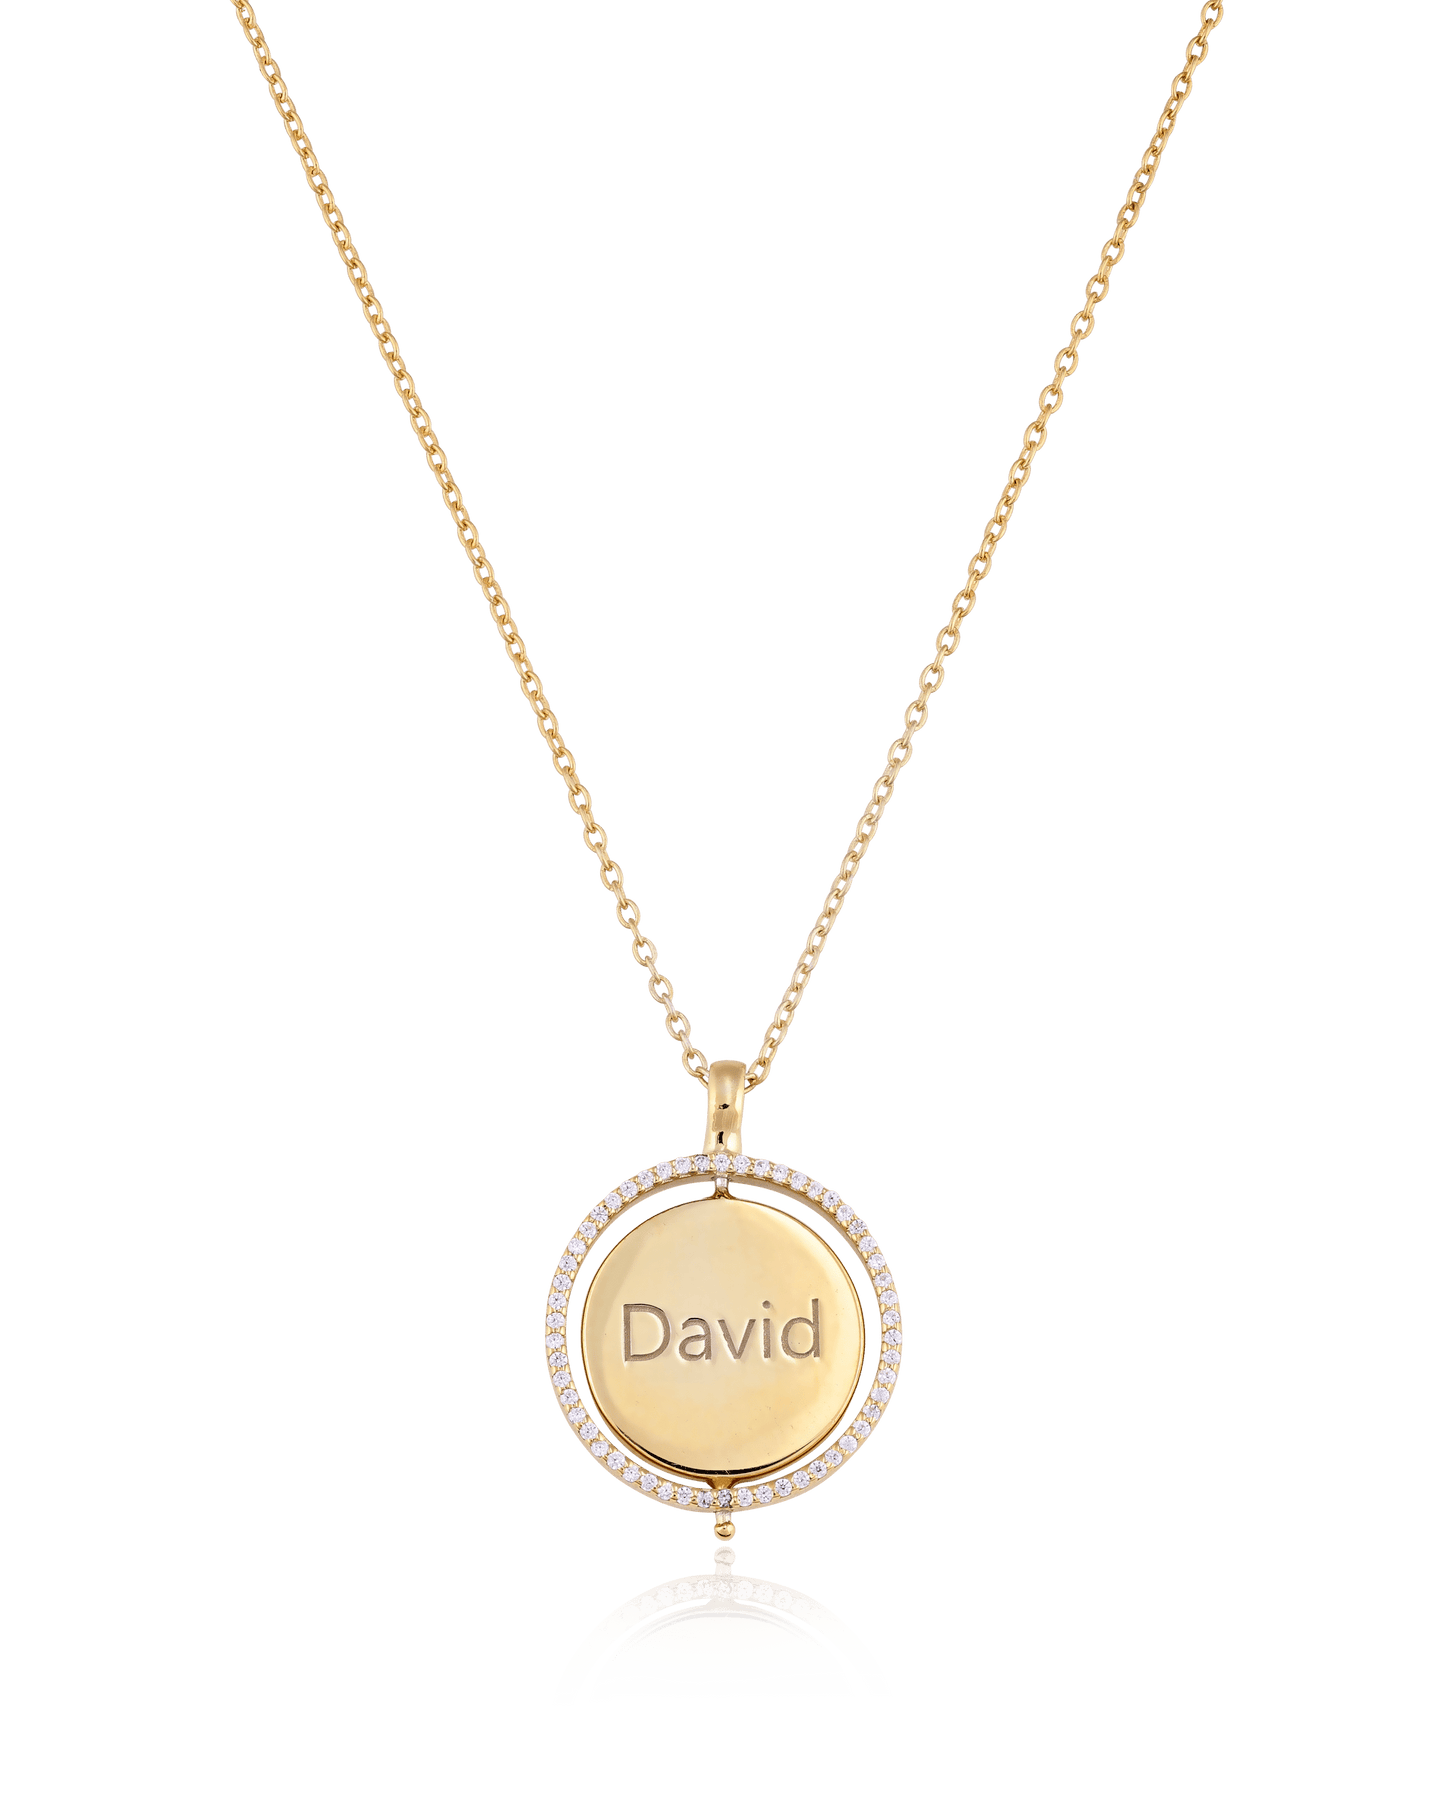 Saturn Ring Necklace - 925 Sterling Silver Necklaces magal-dev 